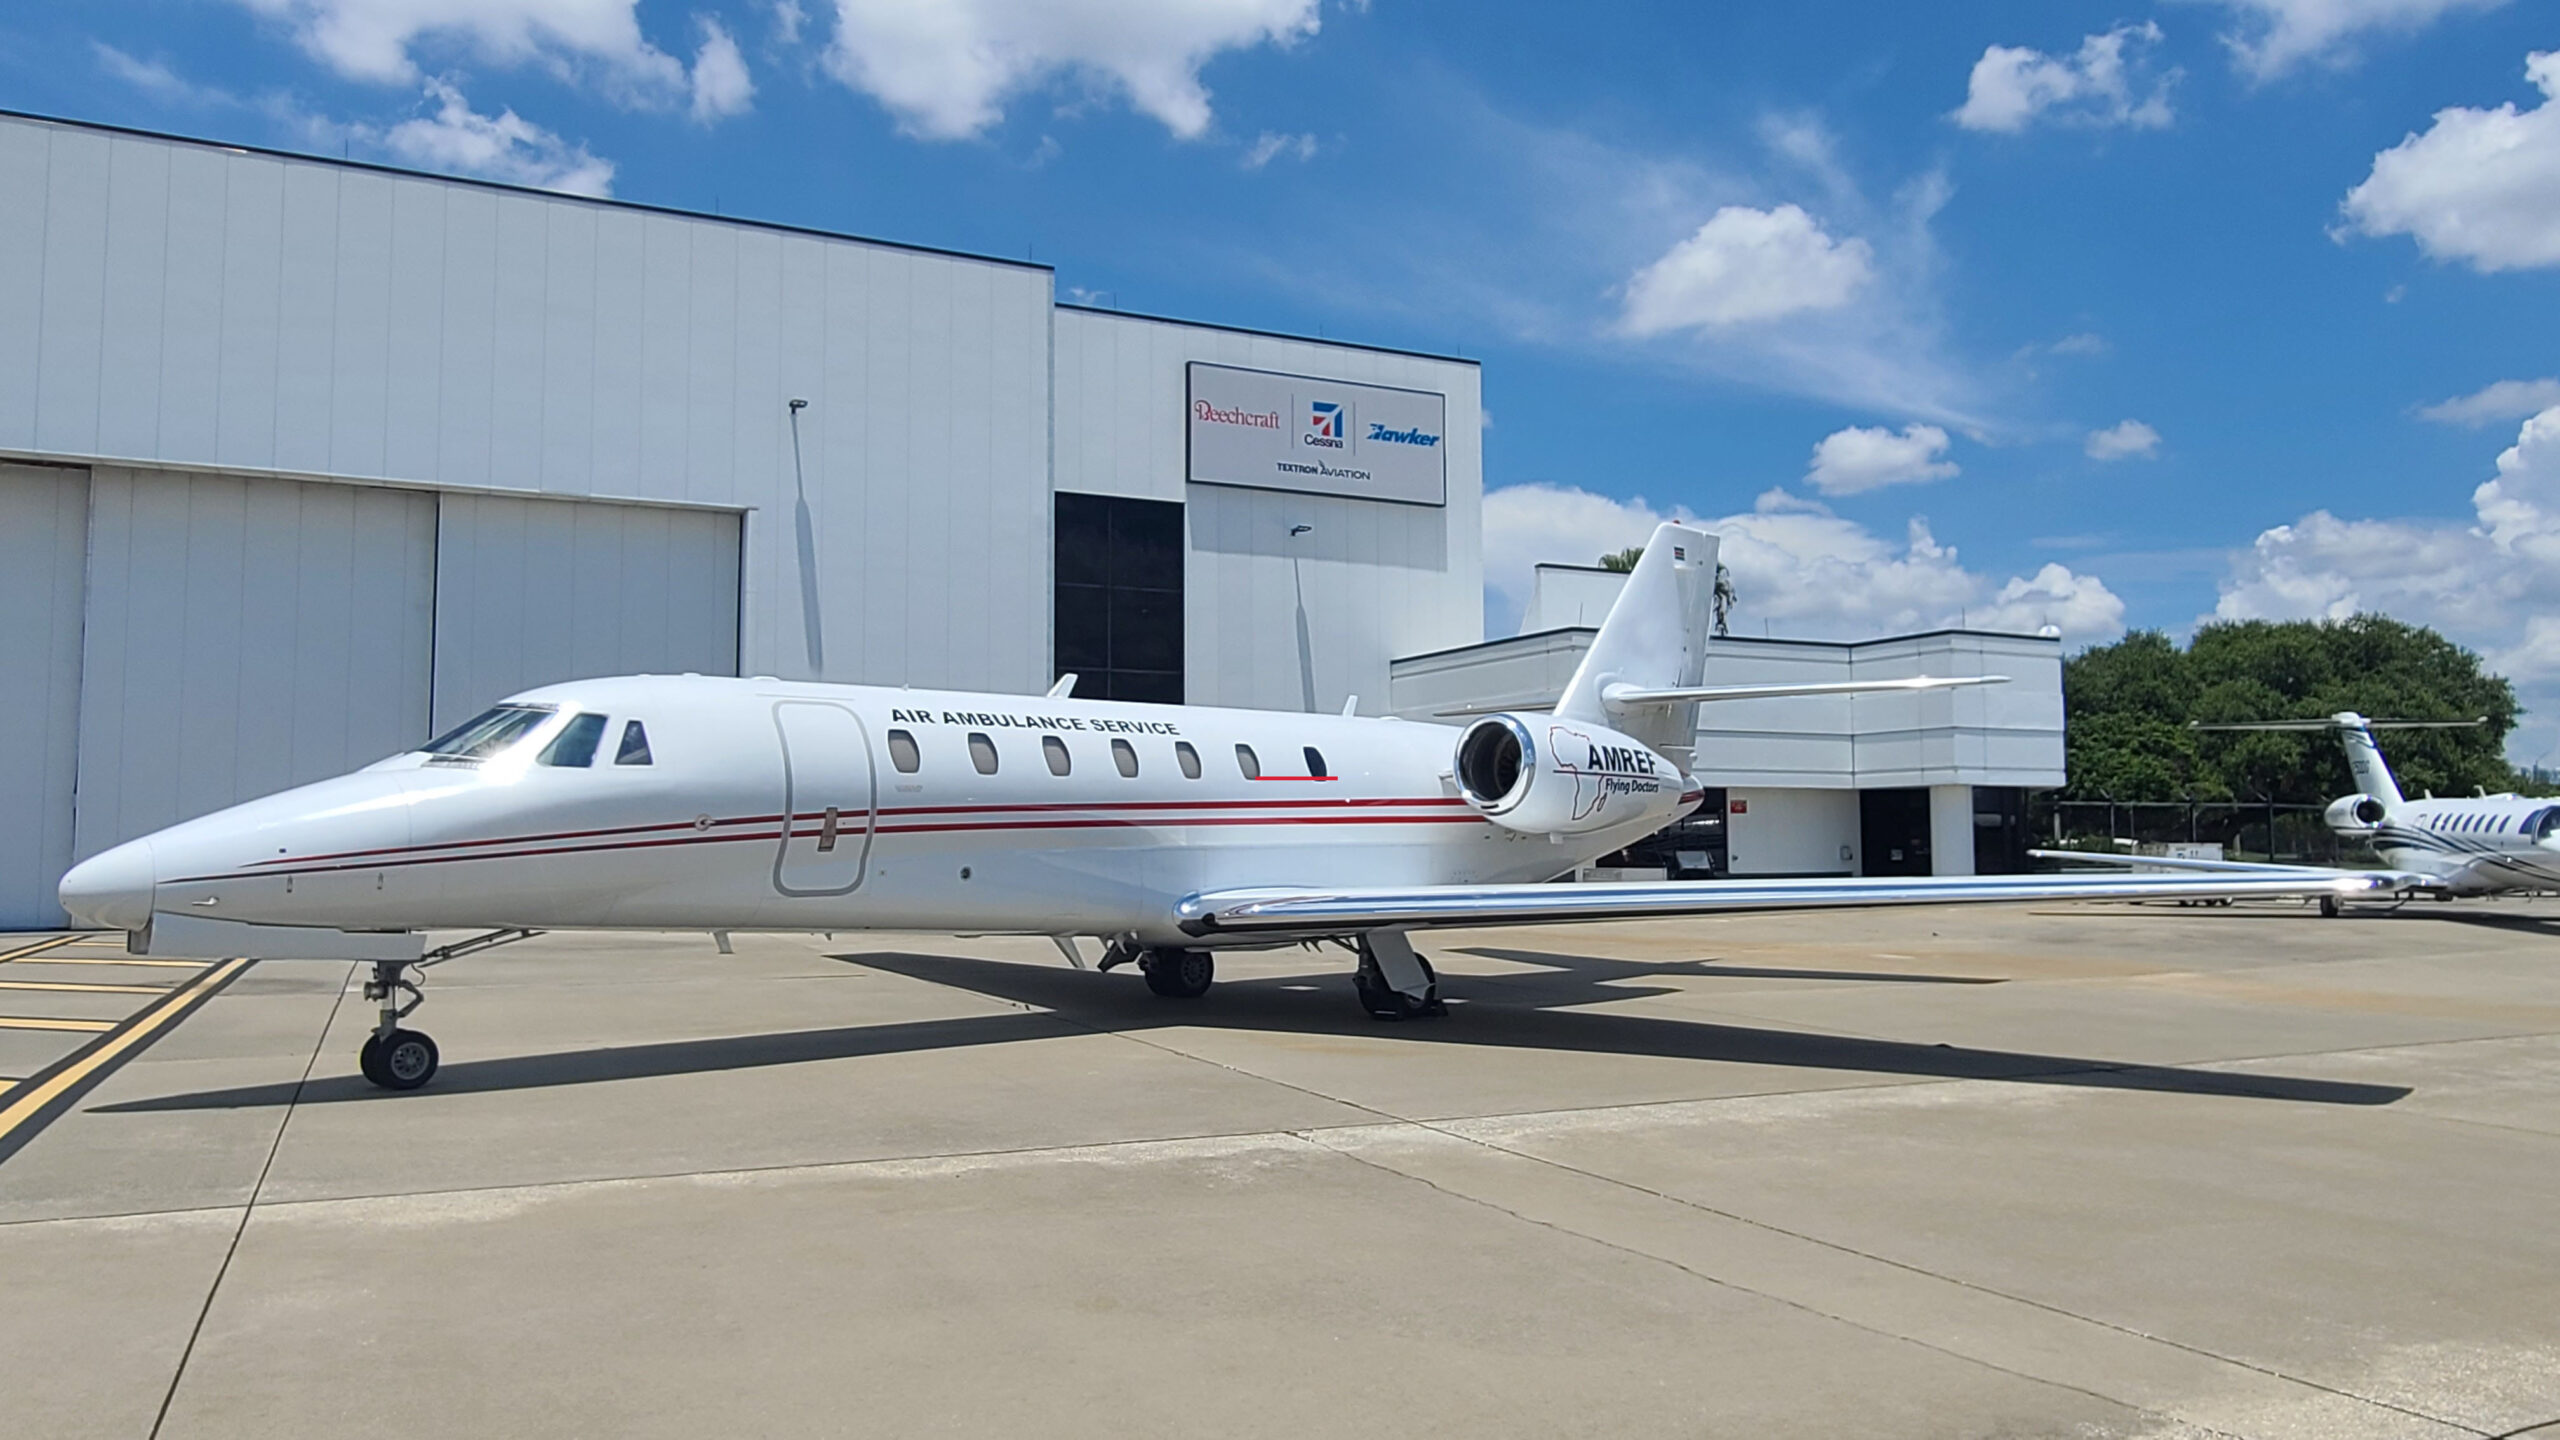 AMREF Flying Doctors adds Special Mission Cessna Citation Sovereign to their air ambulance fleet